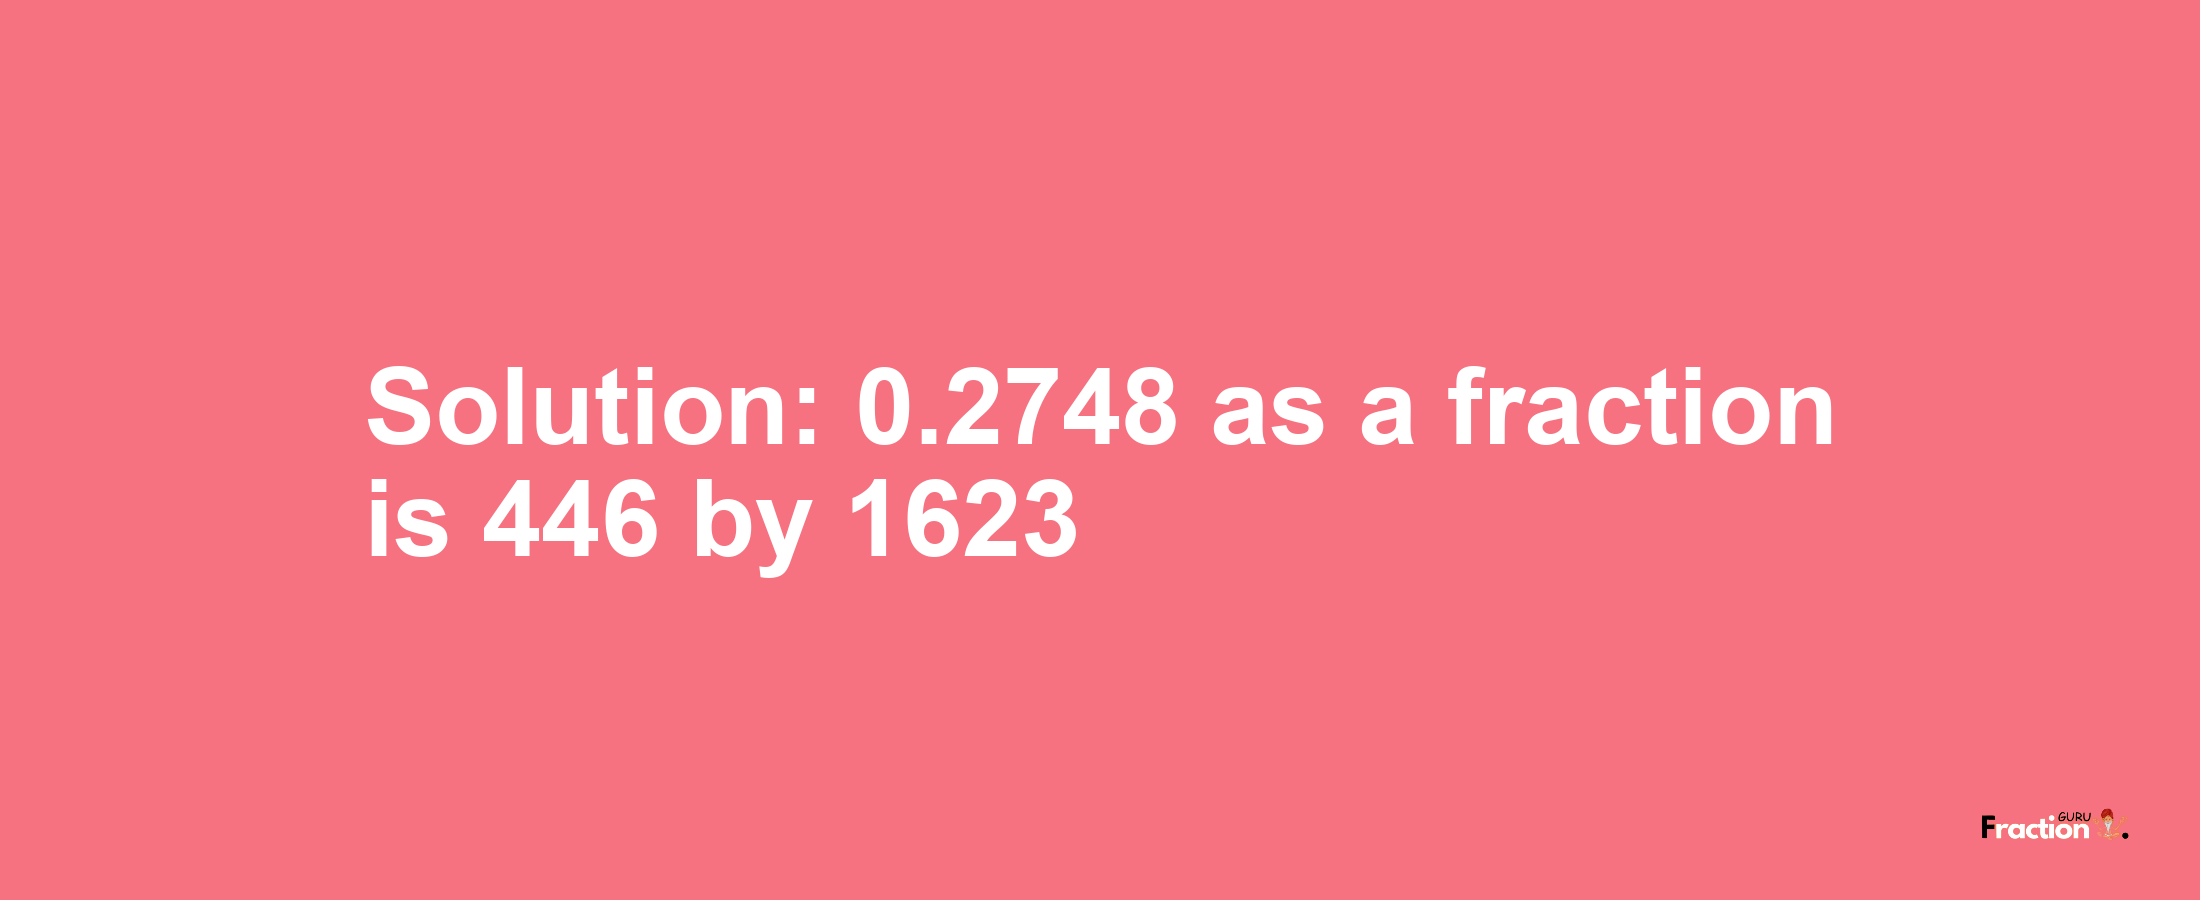 Solution:0.2748 as a fraction is 446/1623